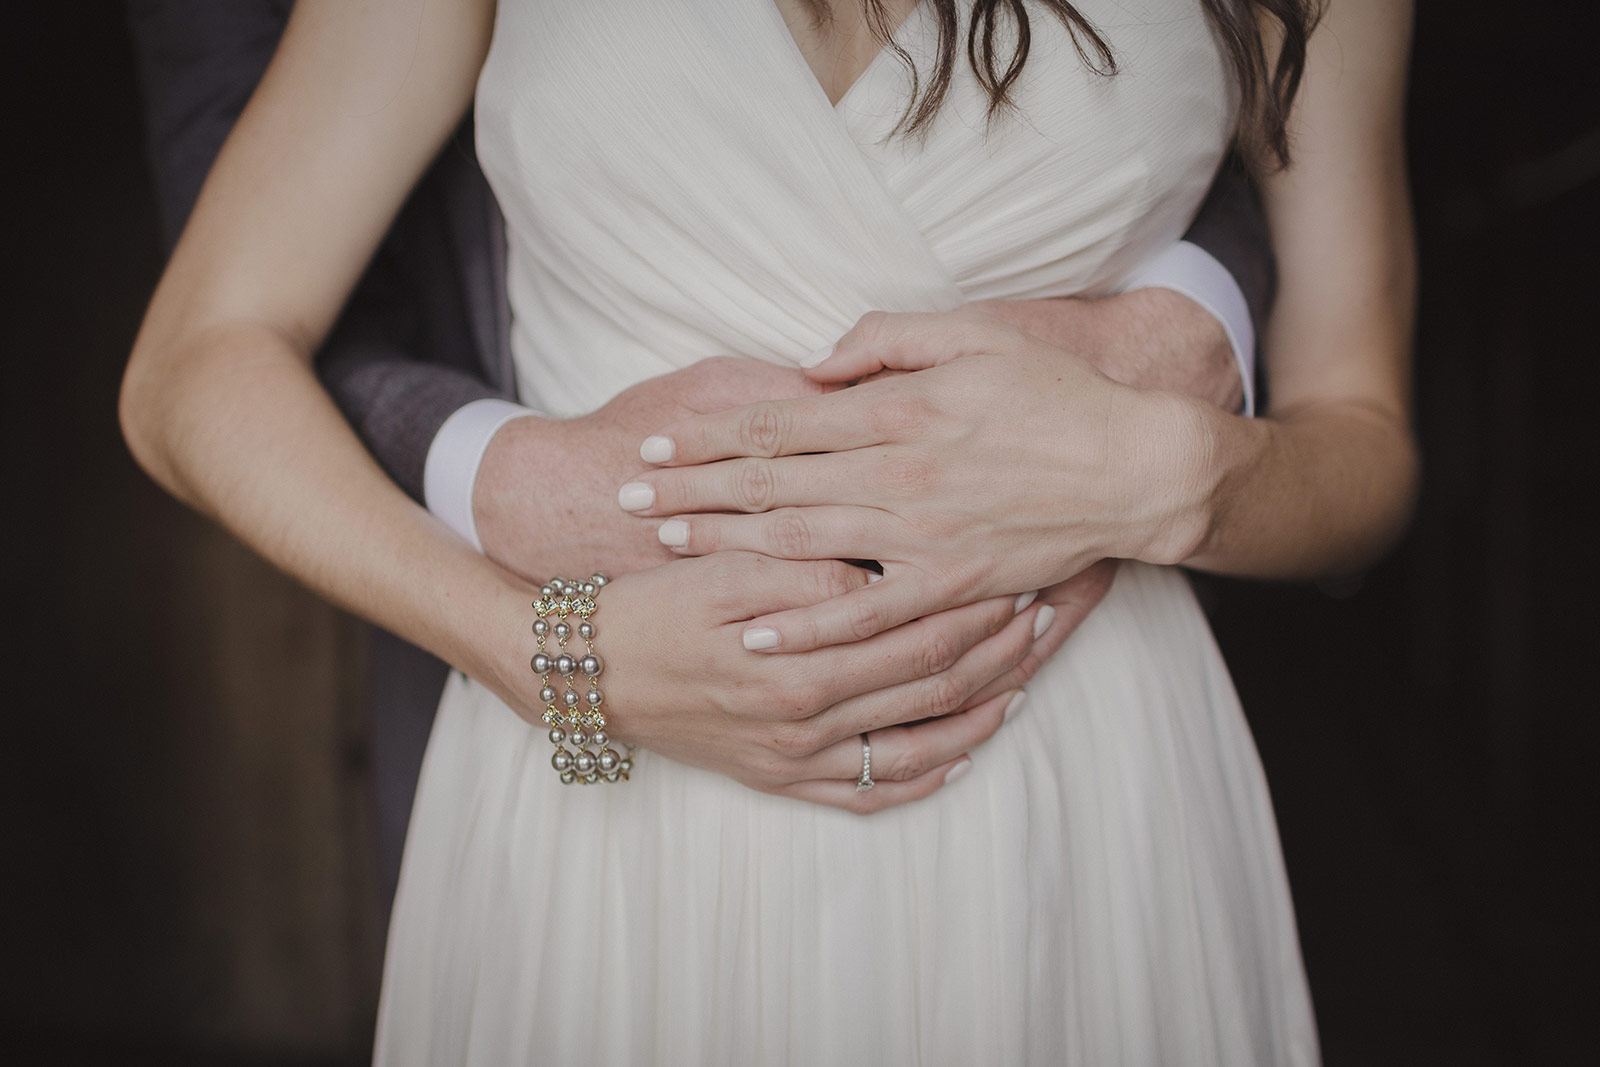 A bride and groom holding hands in front of each other.